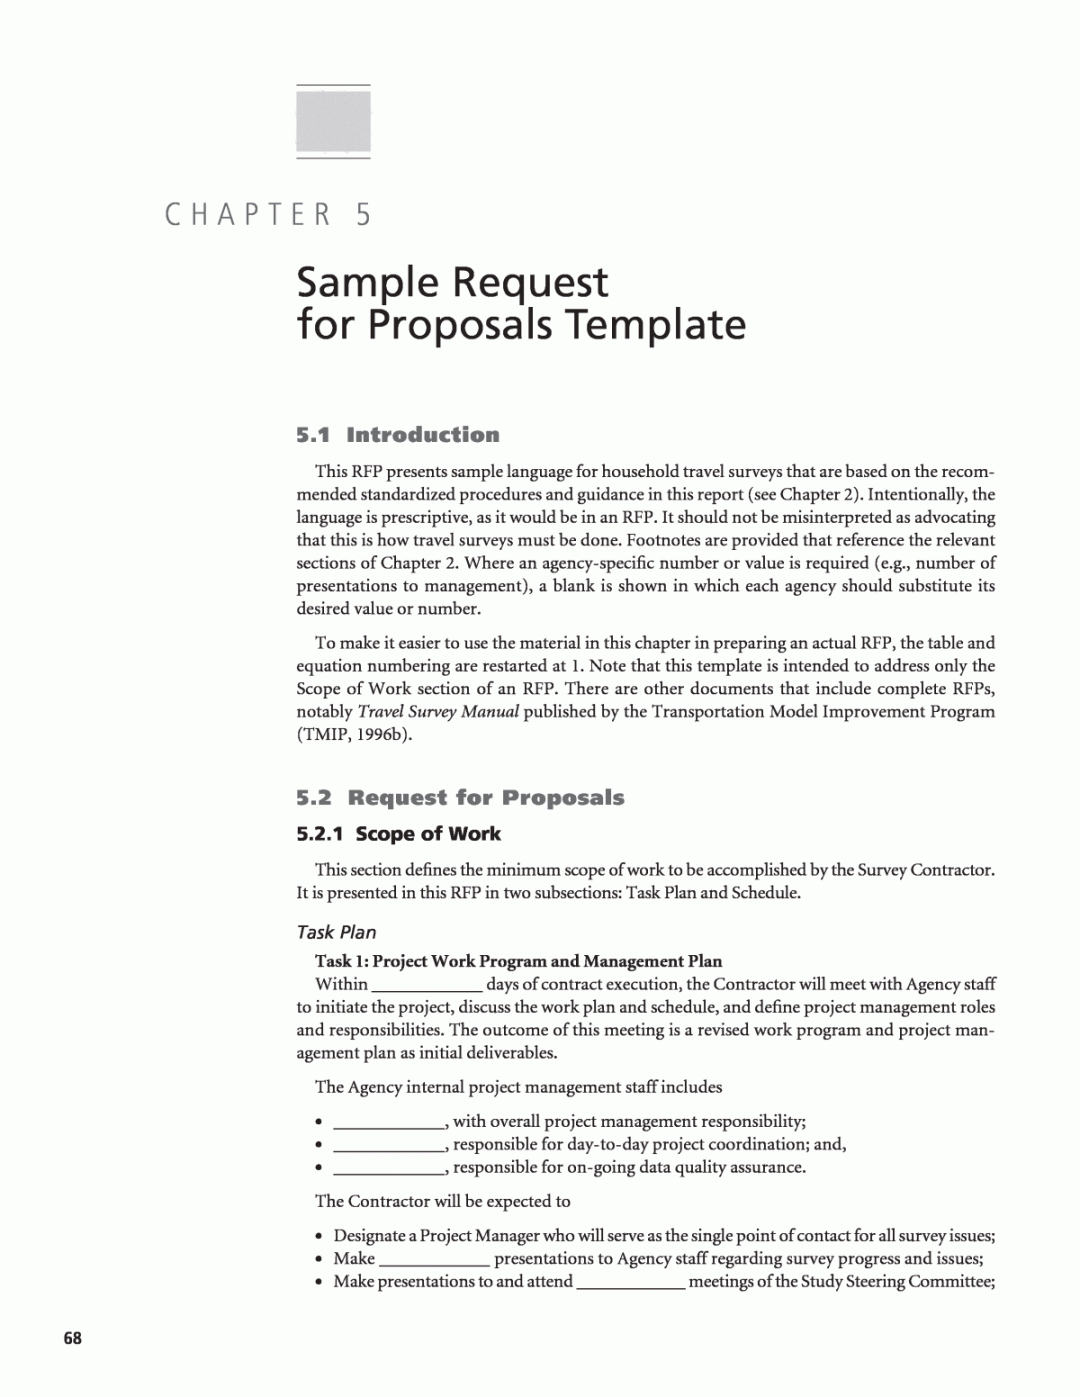 sample chapter 5  sample request for proposals template credit card processing proposal template pdf